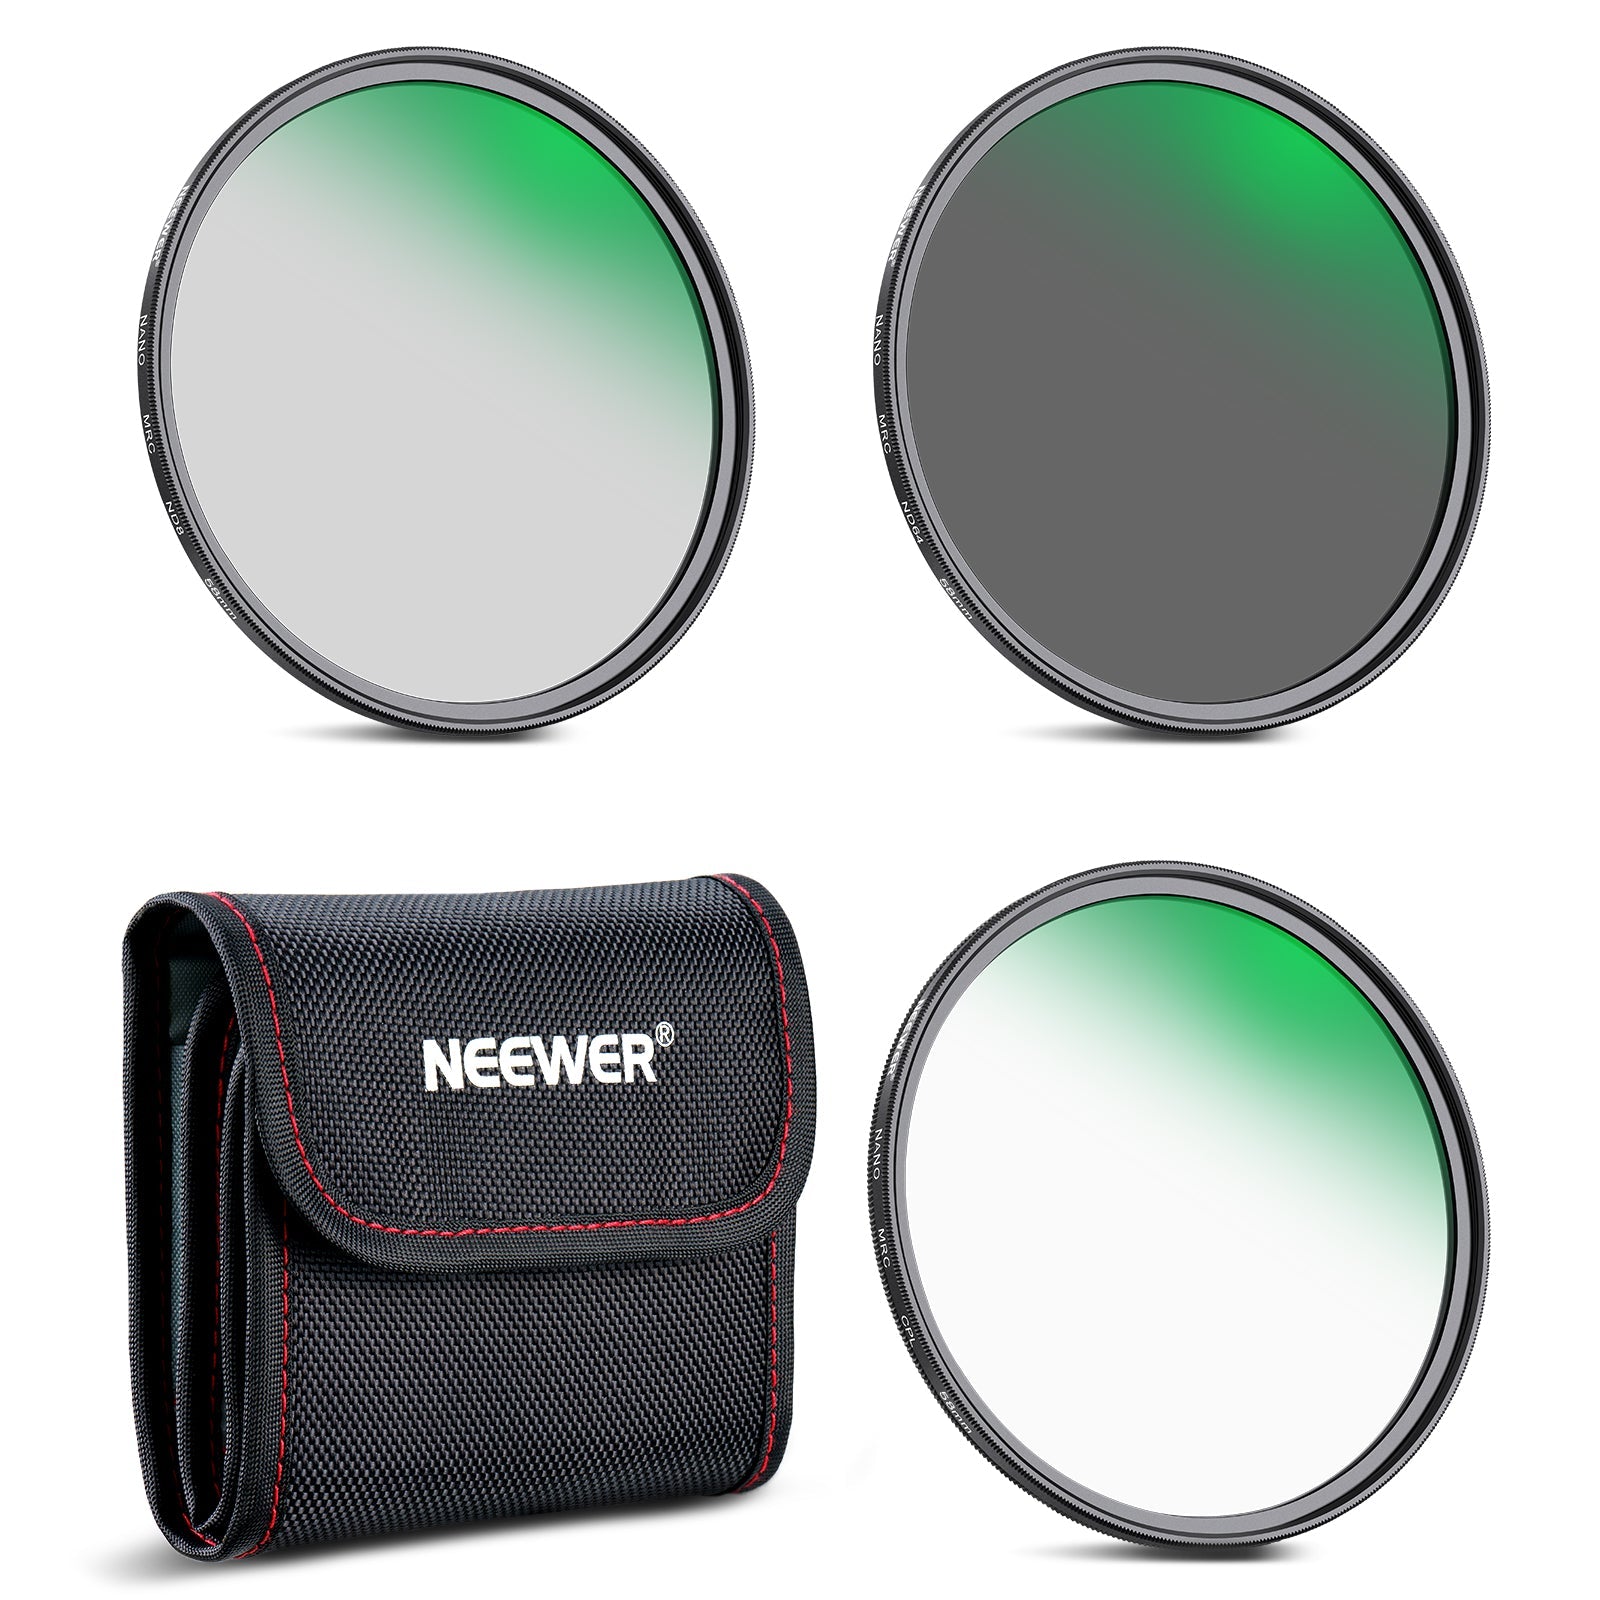 NEEWER ND&CPL Lens Filter Kit (ND8 ND64 CPL)